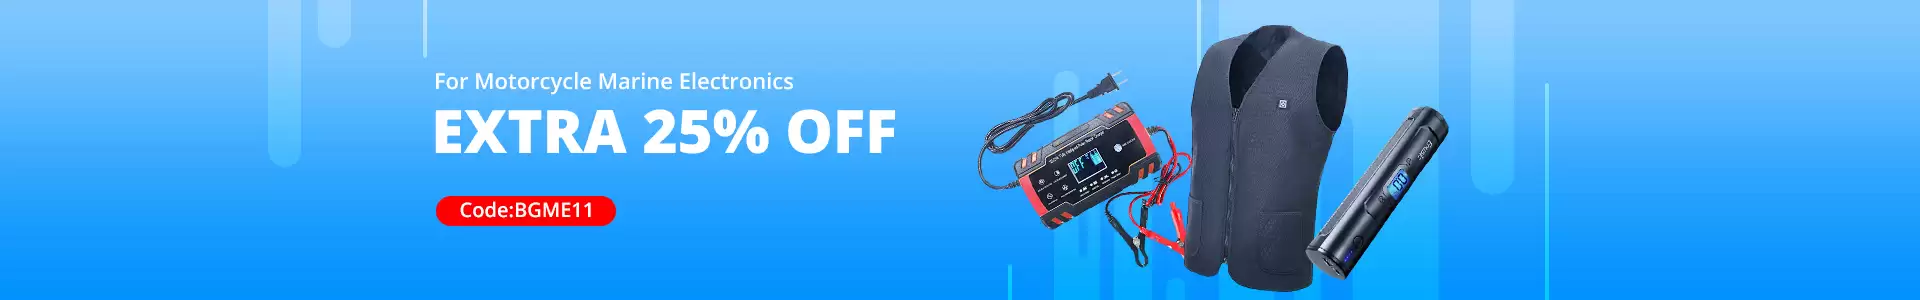 Get Extra 25% Discount On Motorcycle Marine Electronics With This Coupon At Banggood